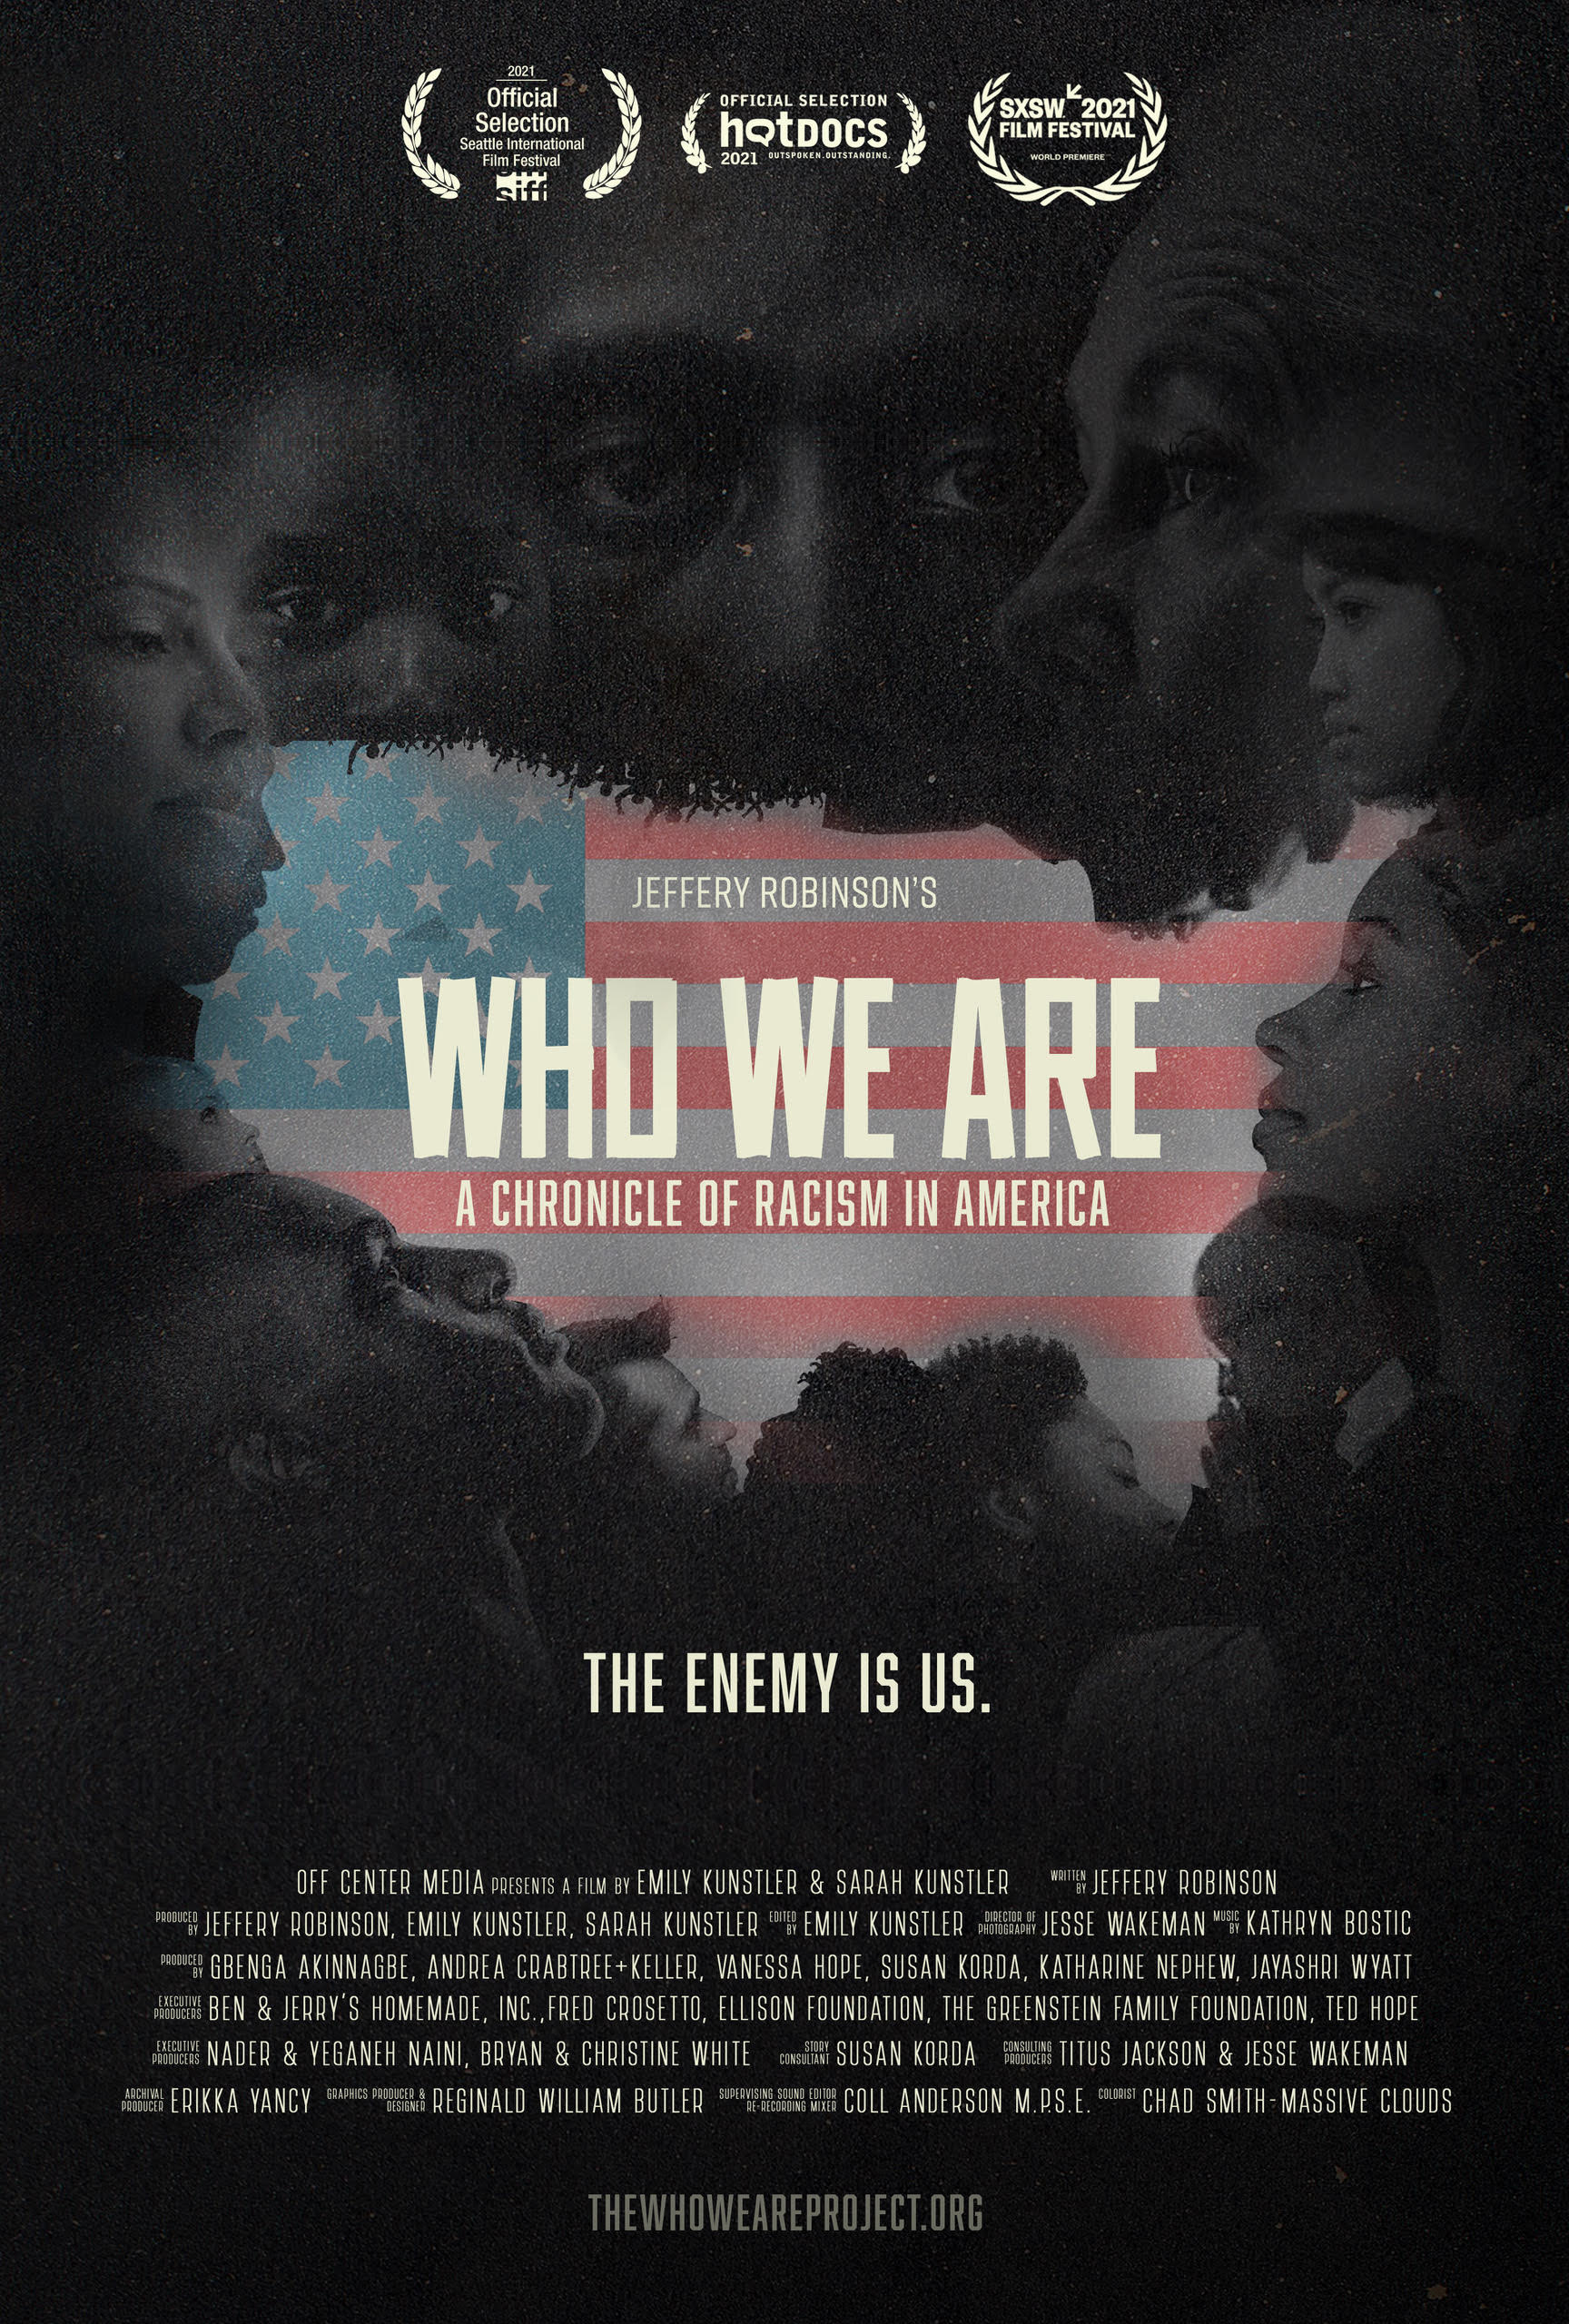 Who We Are: A Chronicle of Racism in America directed by Emily Kunstler and Sarah Kunstler